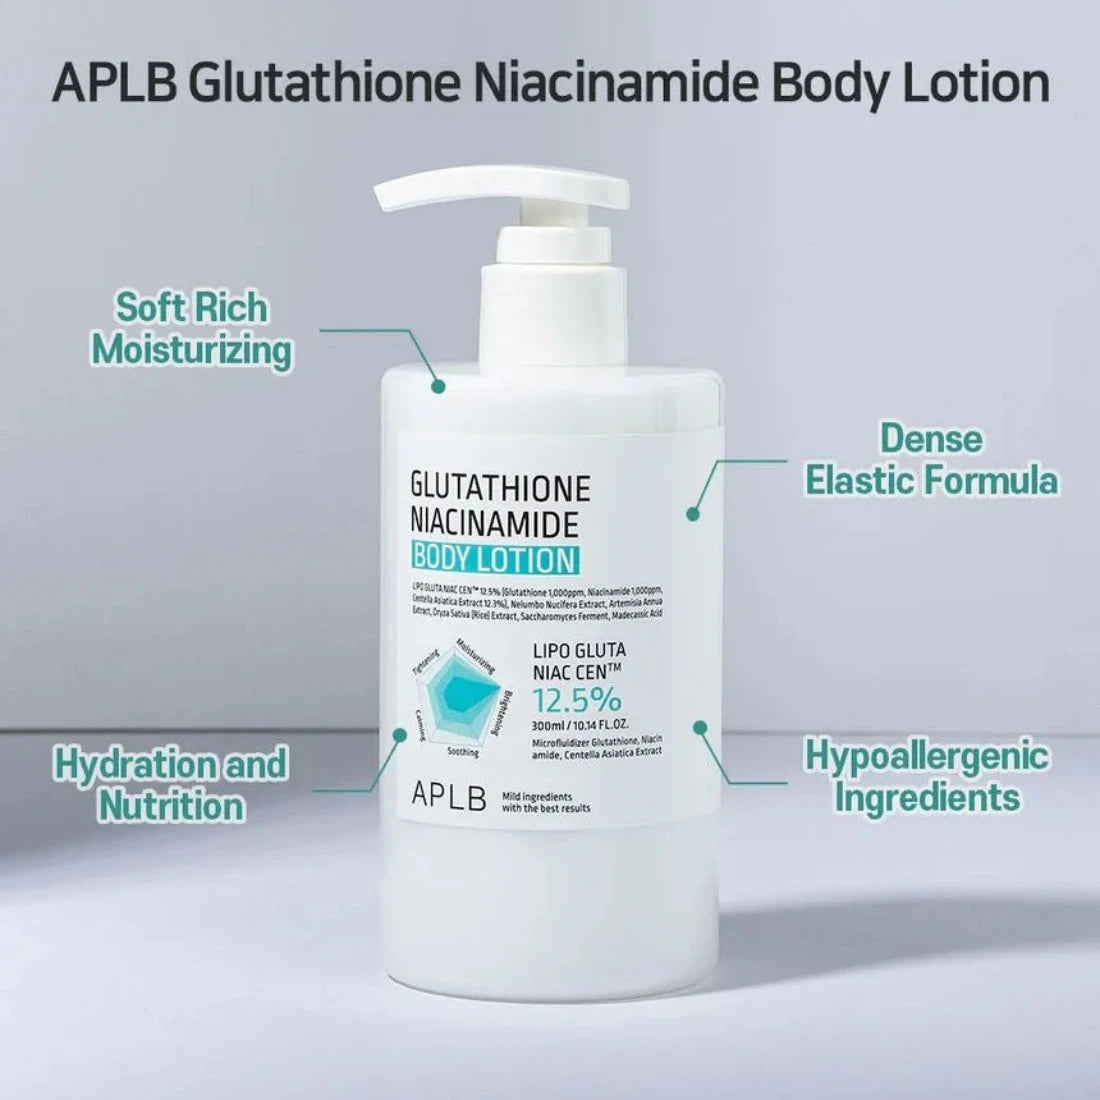 APLB Glutathione Niacinamide Body Lotion 300ml  - to improve skin texture, reduce the appearance of wrinkles, and enhance skin tone.